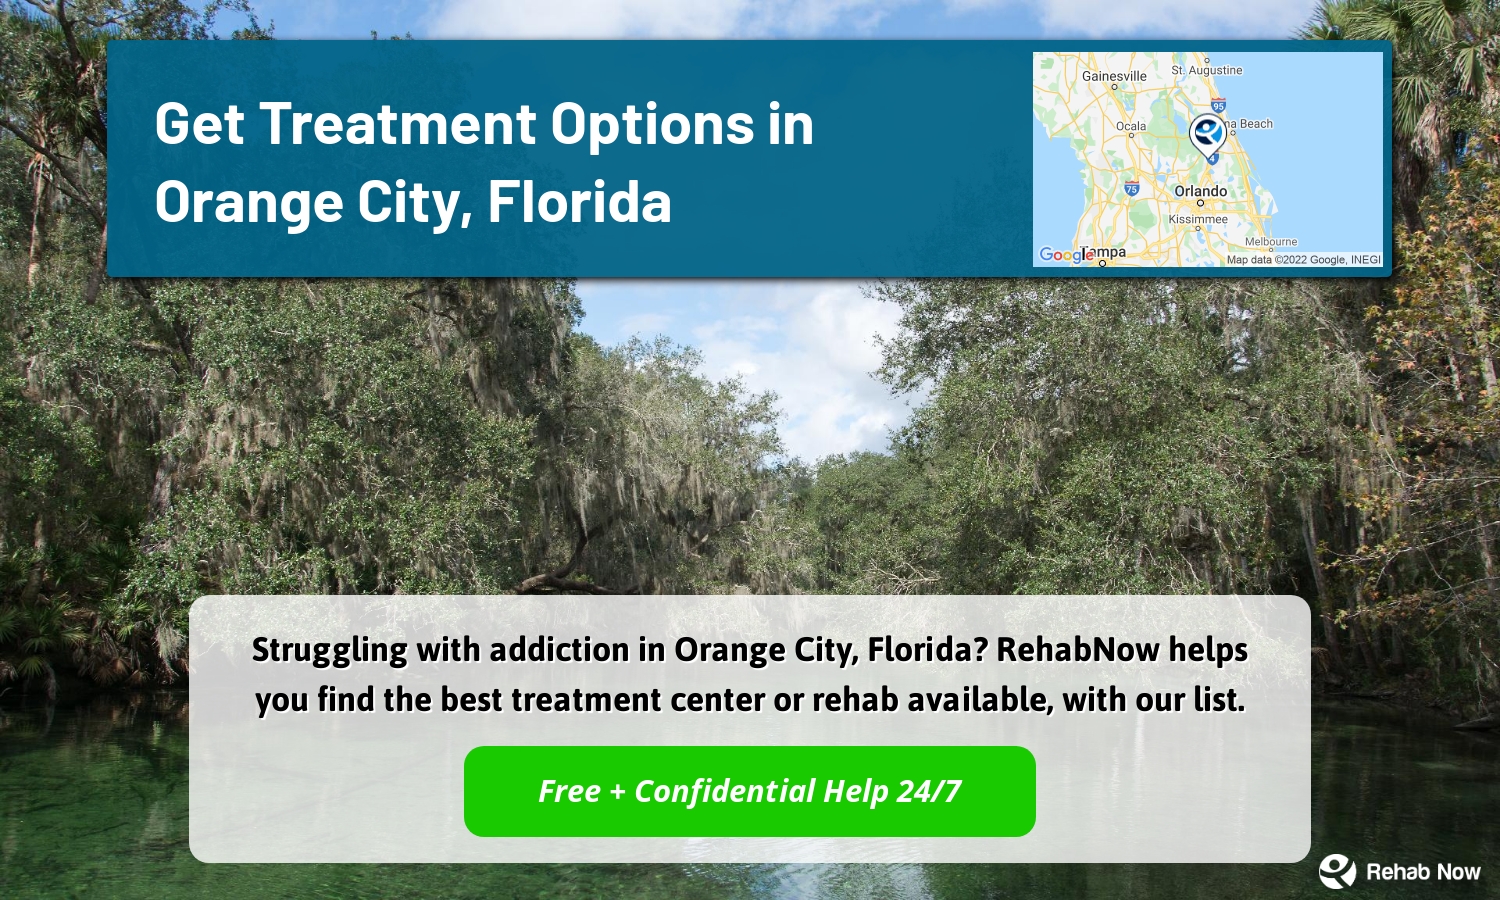 Struggling with addiction in Orange City, Florida? RehabNow helps you find the best treatment center or rehab available, with our list.